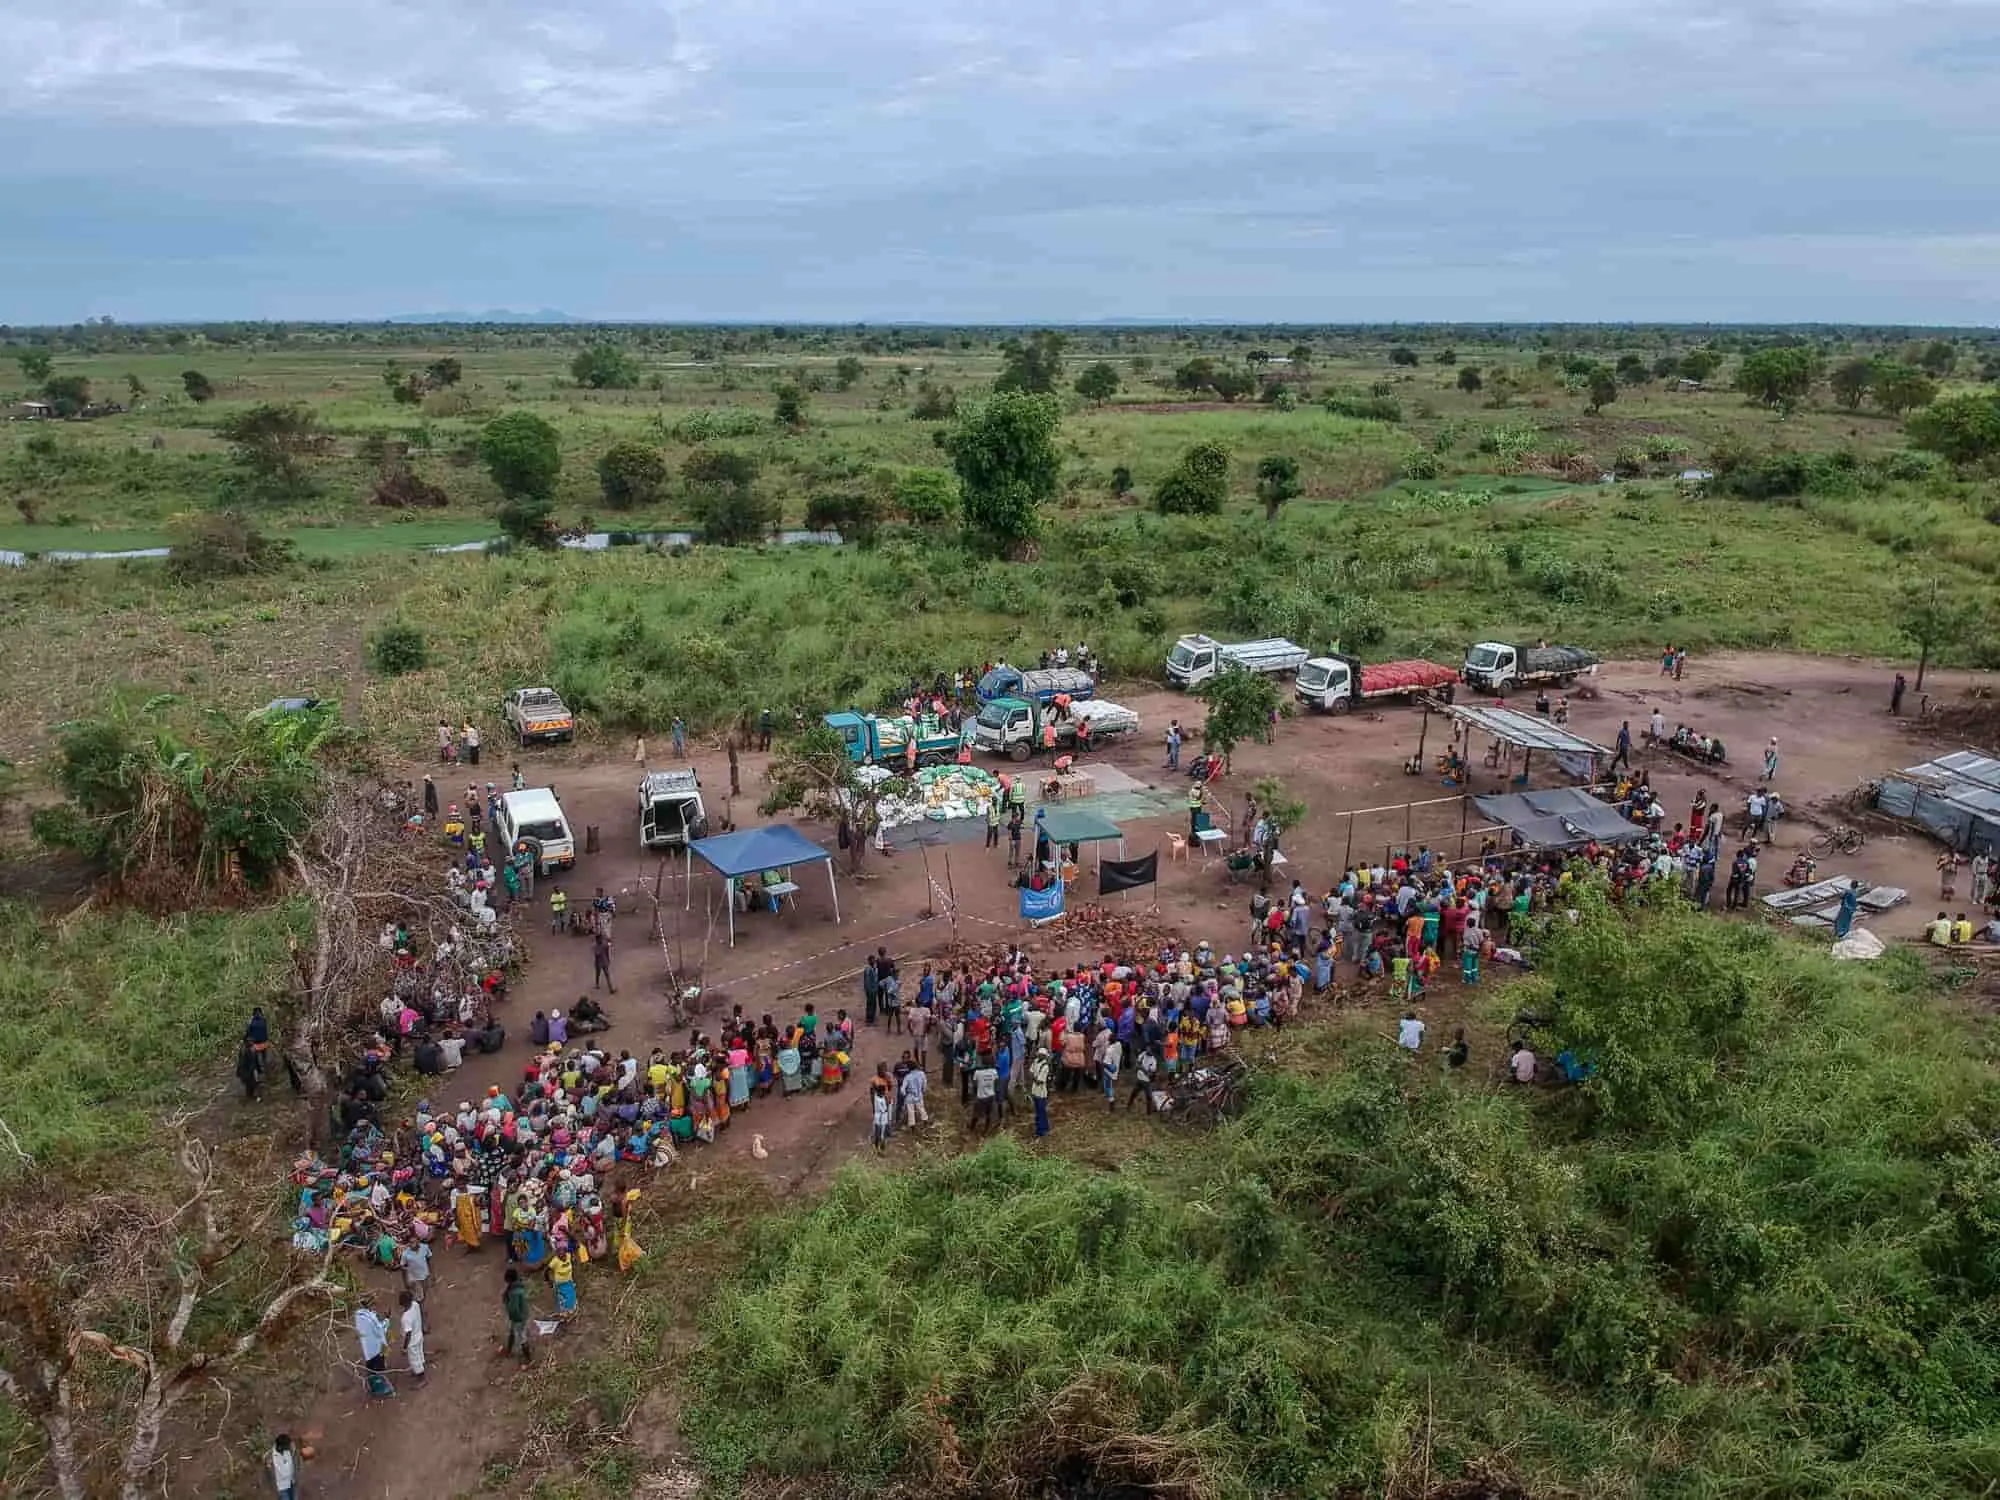 Aerial view of aid distribution in rural Mozambique